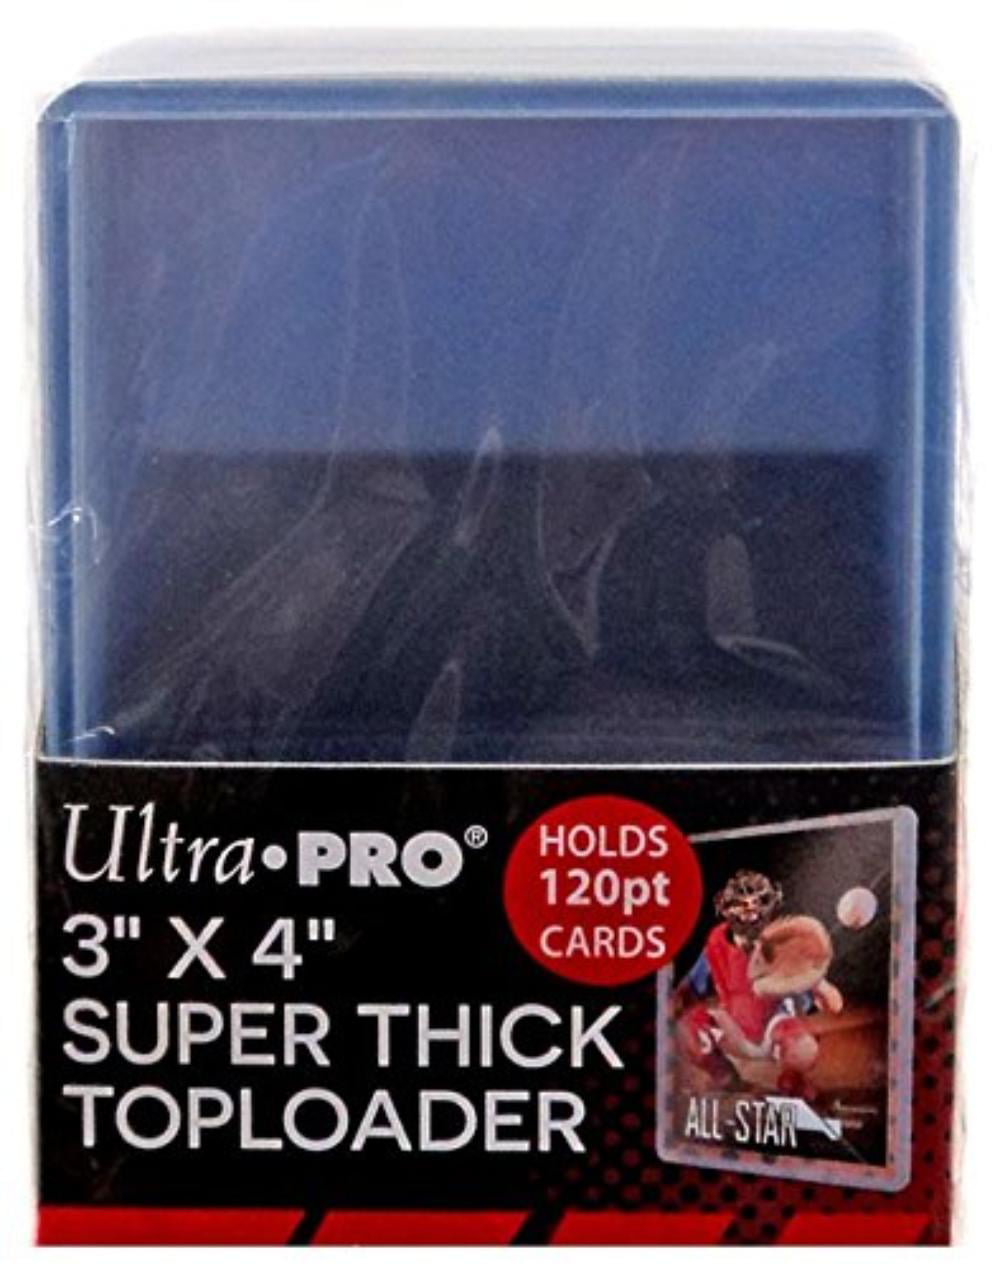 SUPER THICK THICK 3 NEW ULTRA PRO 3"X4" CARD TOPLOADER PACK SIZES REGULAR 